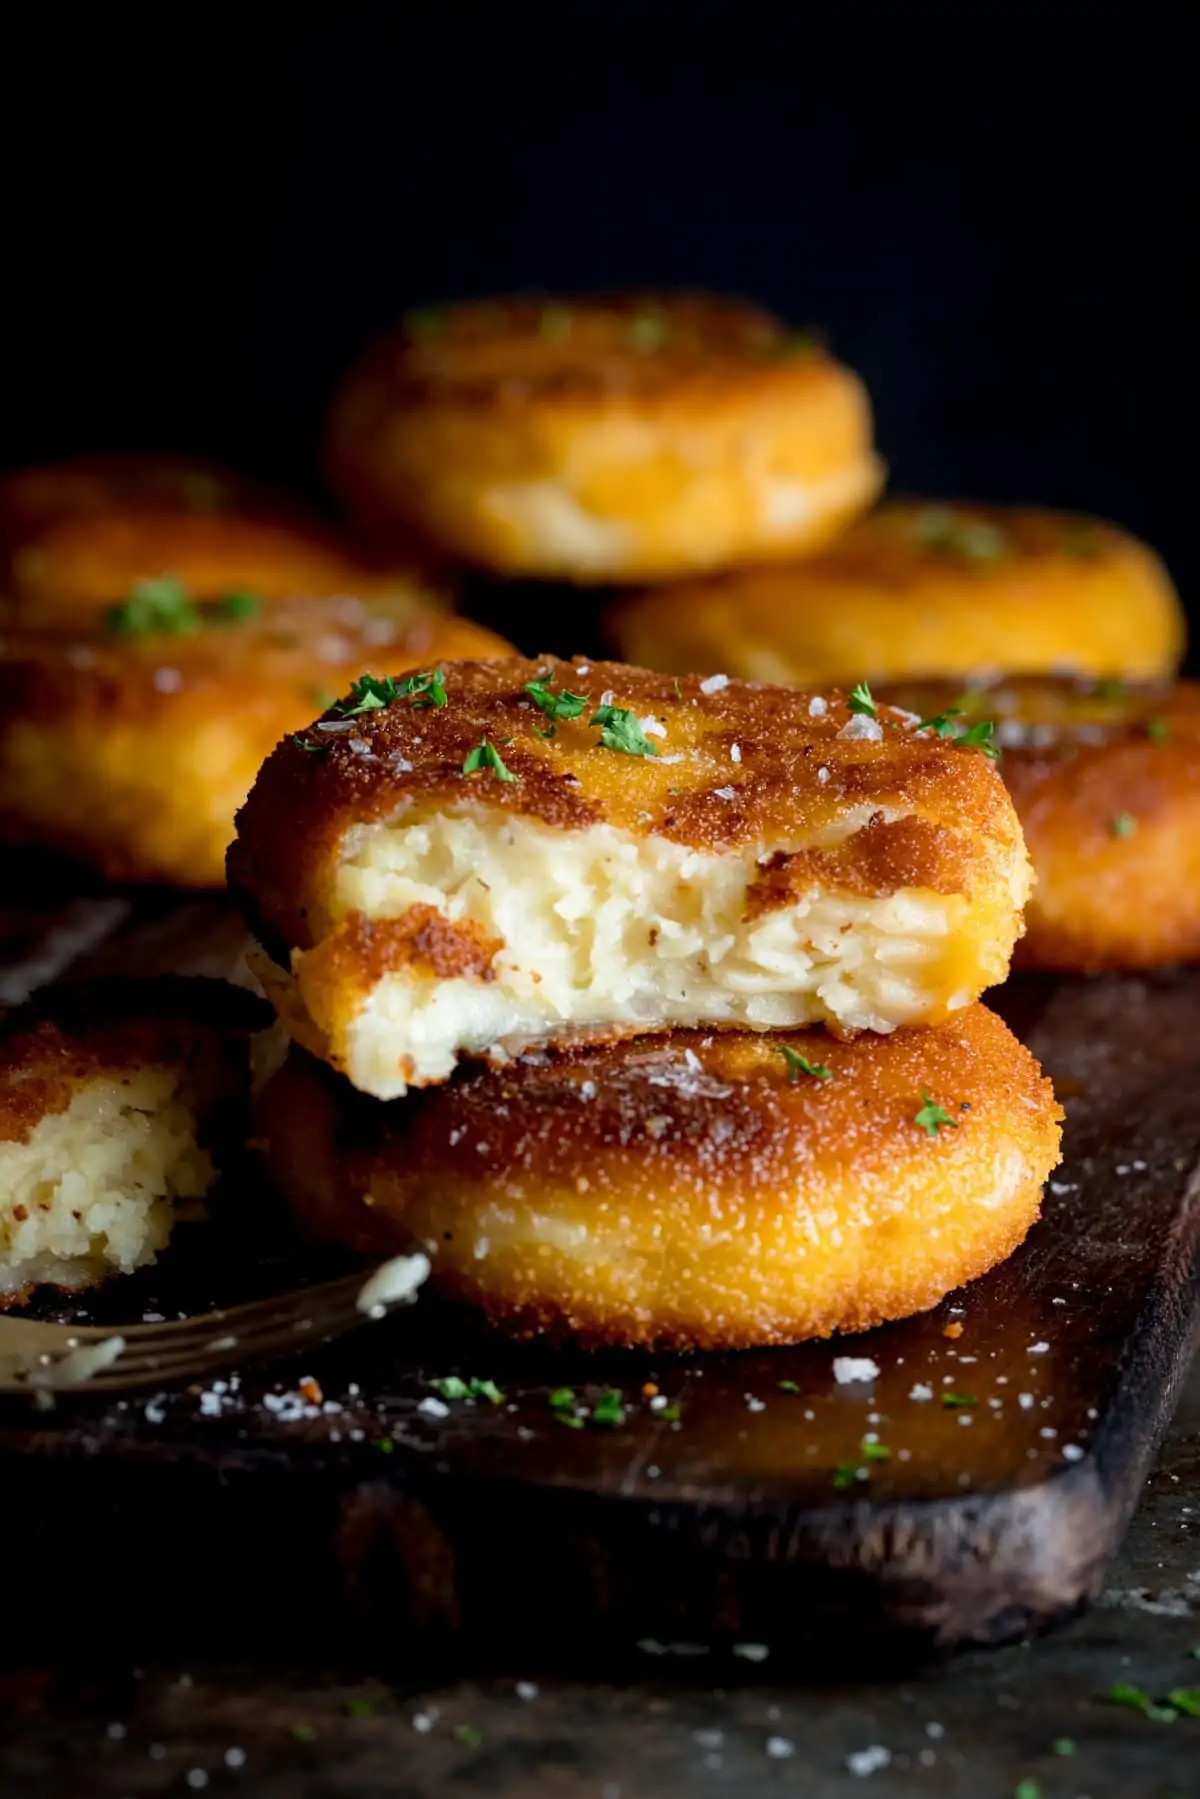 A wooden board full of cooked cheesy potato cakes, sprinkled with salt and chopped parsley, one is cut in half and oozy.